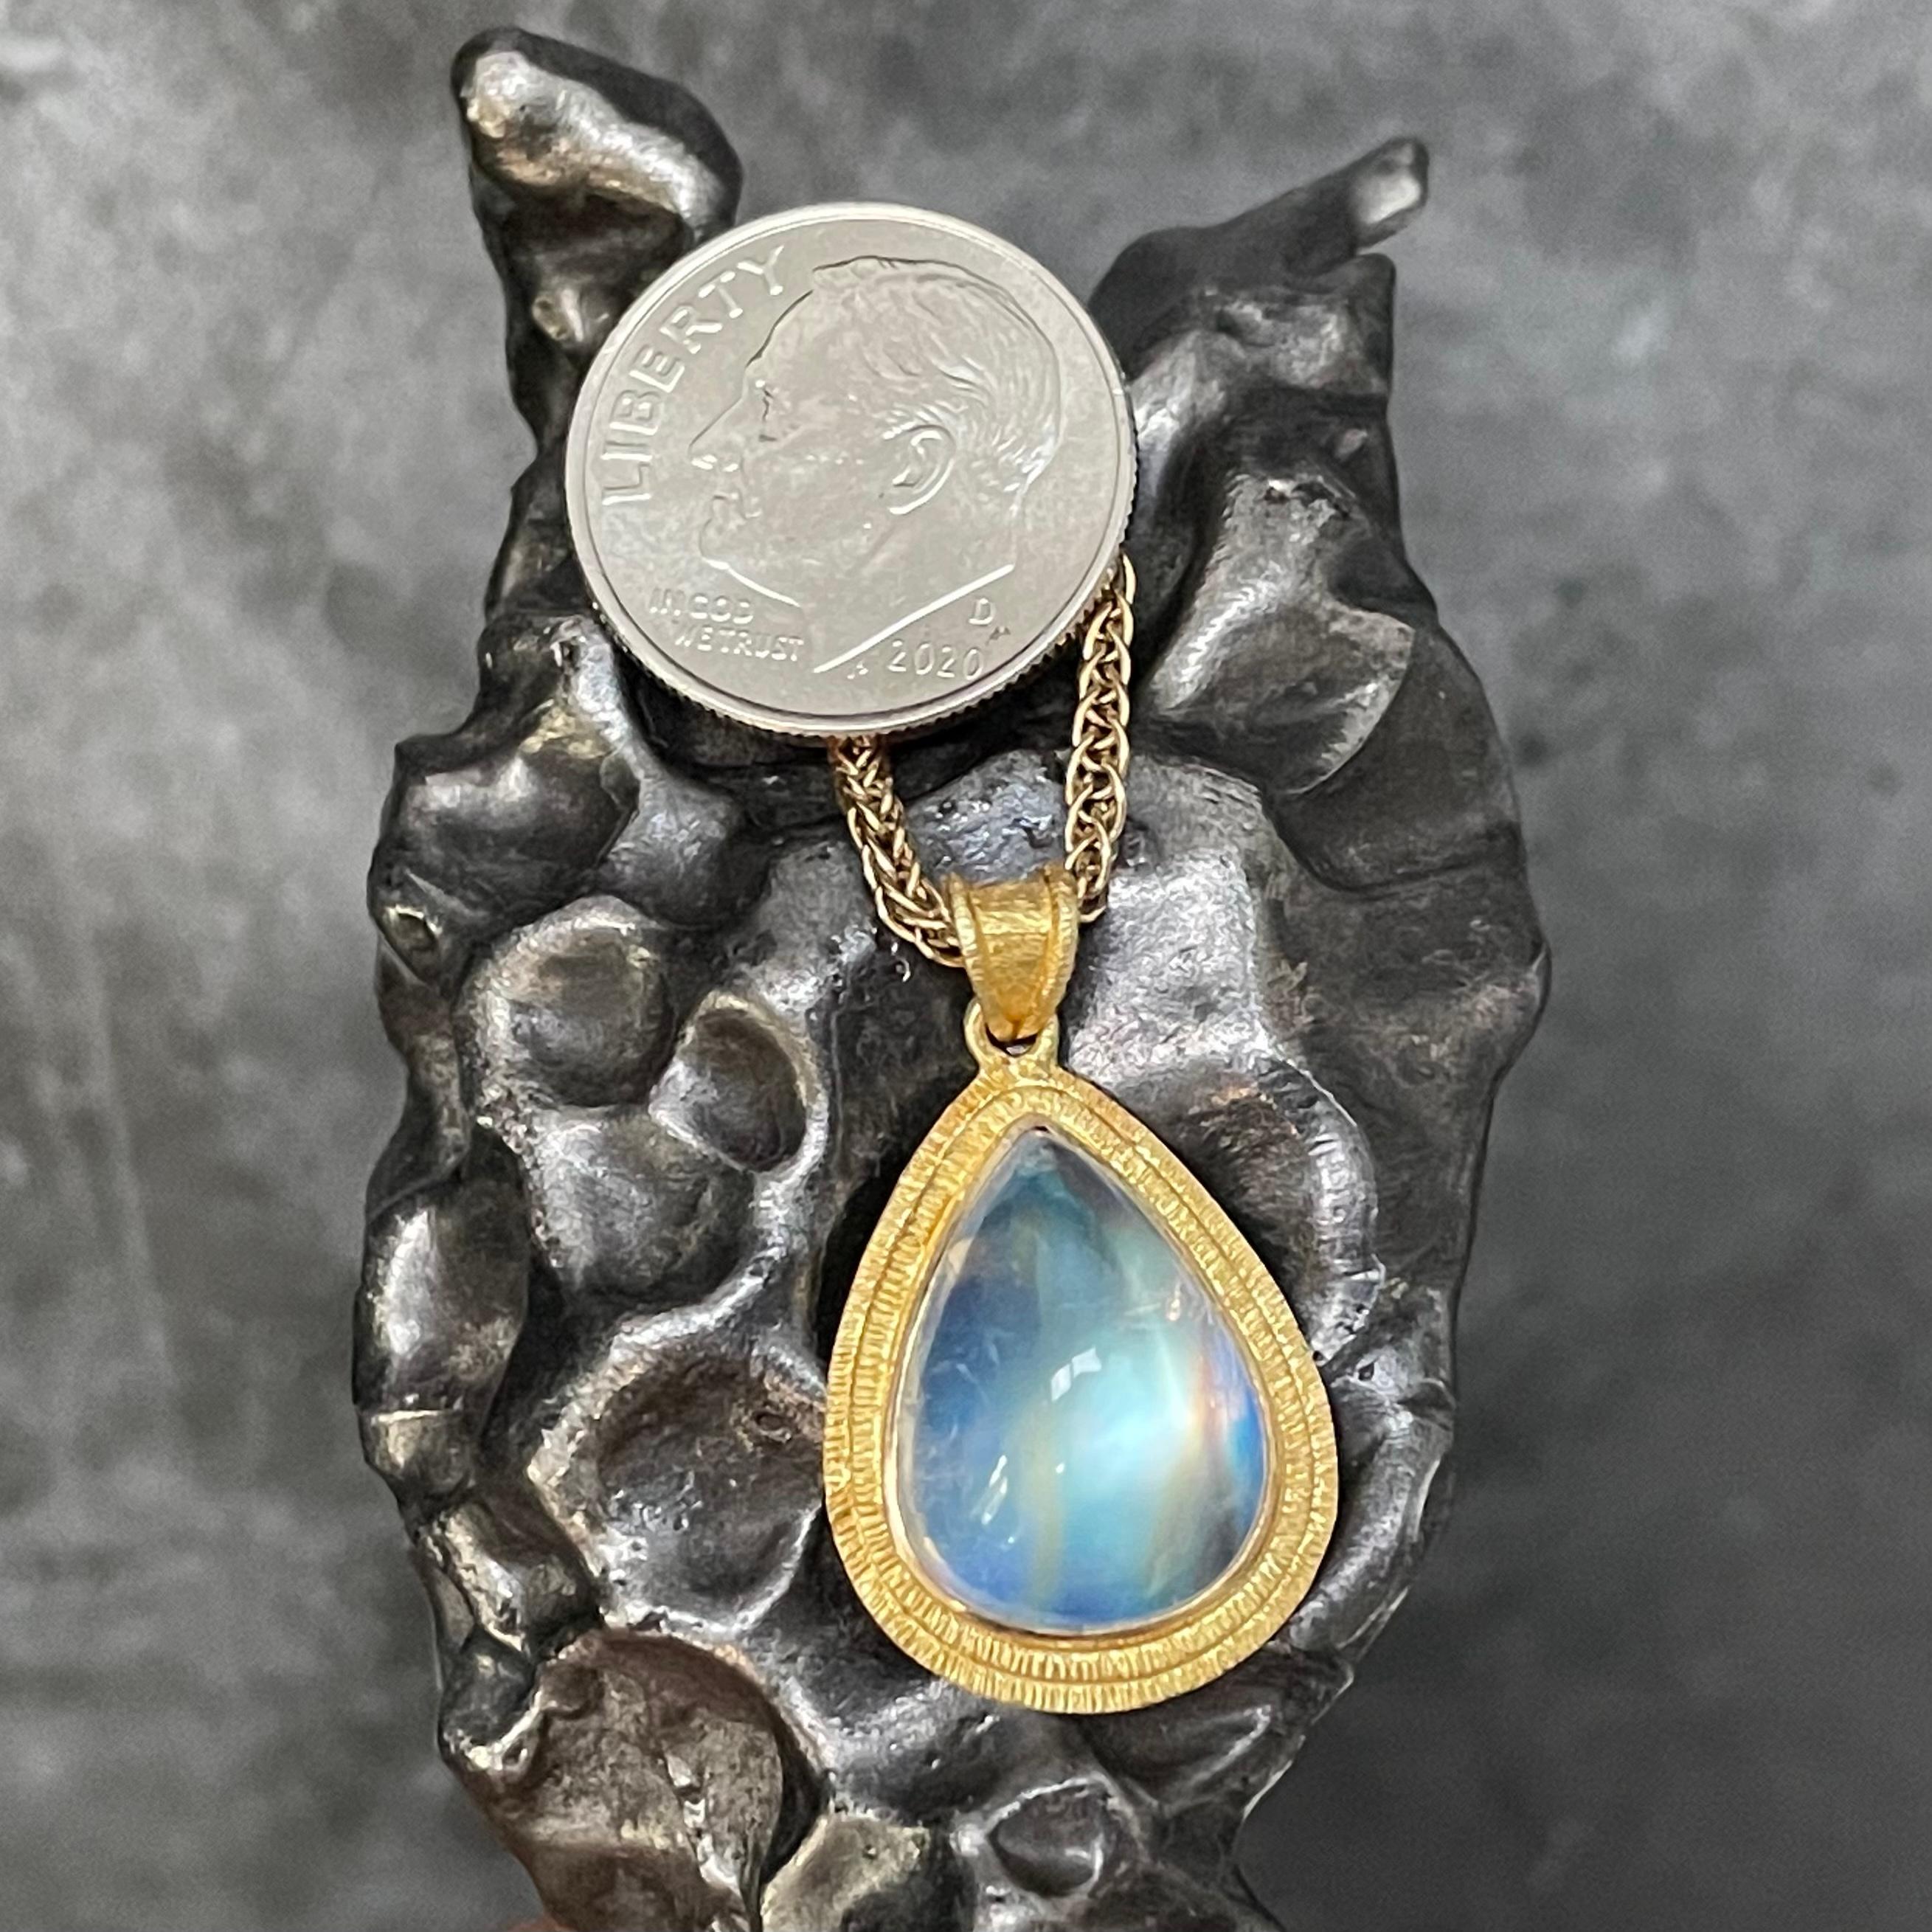 A flashing 11 x 14 mm pear shaped rainbow moonstone cabochon is set within a signature double line texture Steven Battelle setting in this classic pendant design.  I love rainbow moonstone for its magical properties. Super nice !  The 18 inch woven